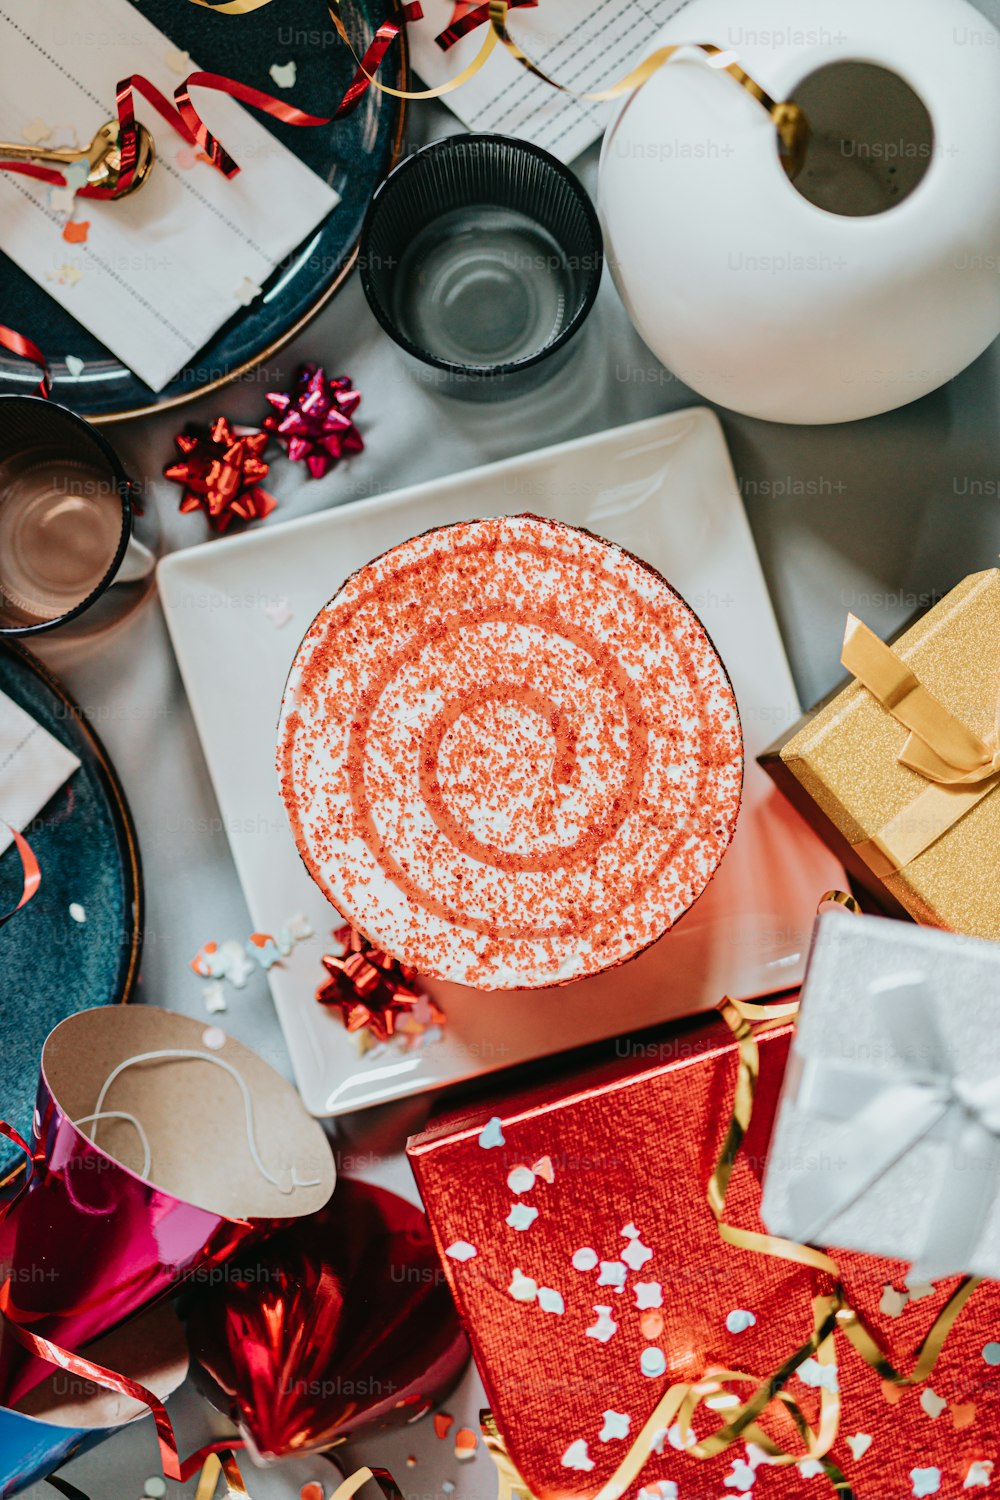 a white plate topped with a red cake next to presents